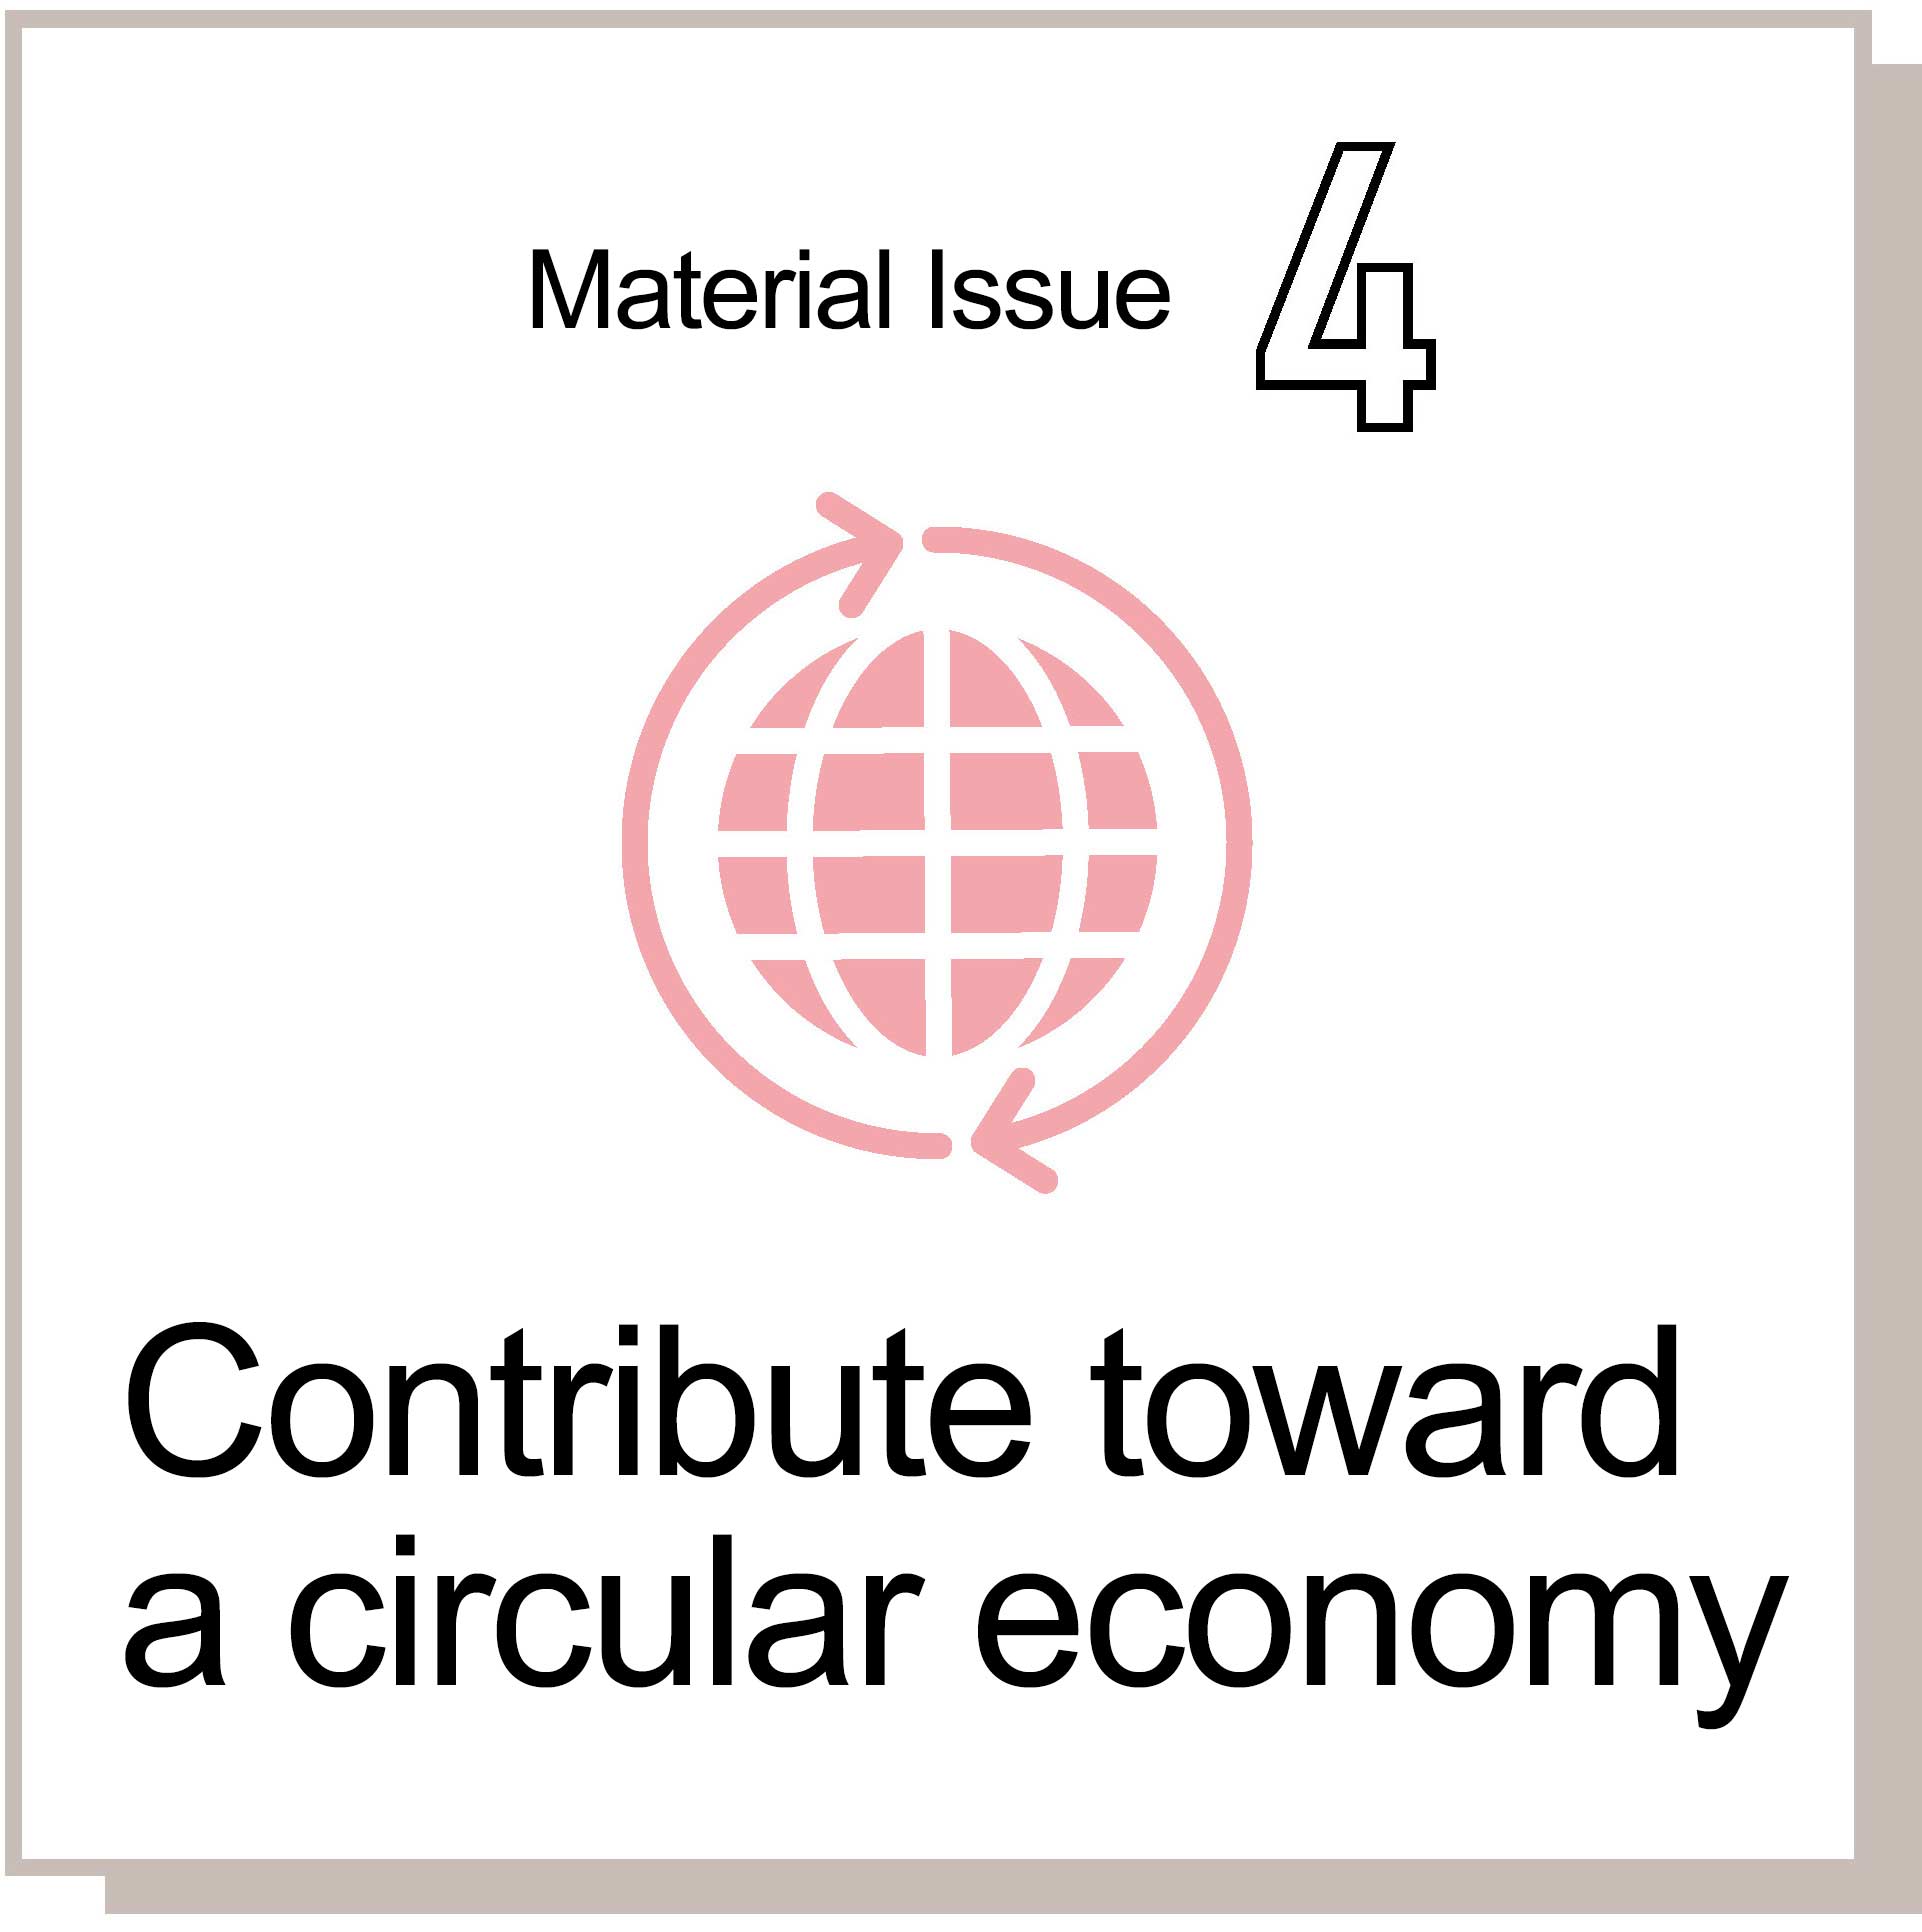 Material Issue 4 Contribute toward a circular economy